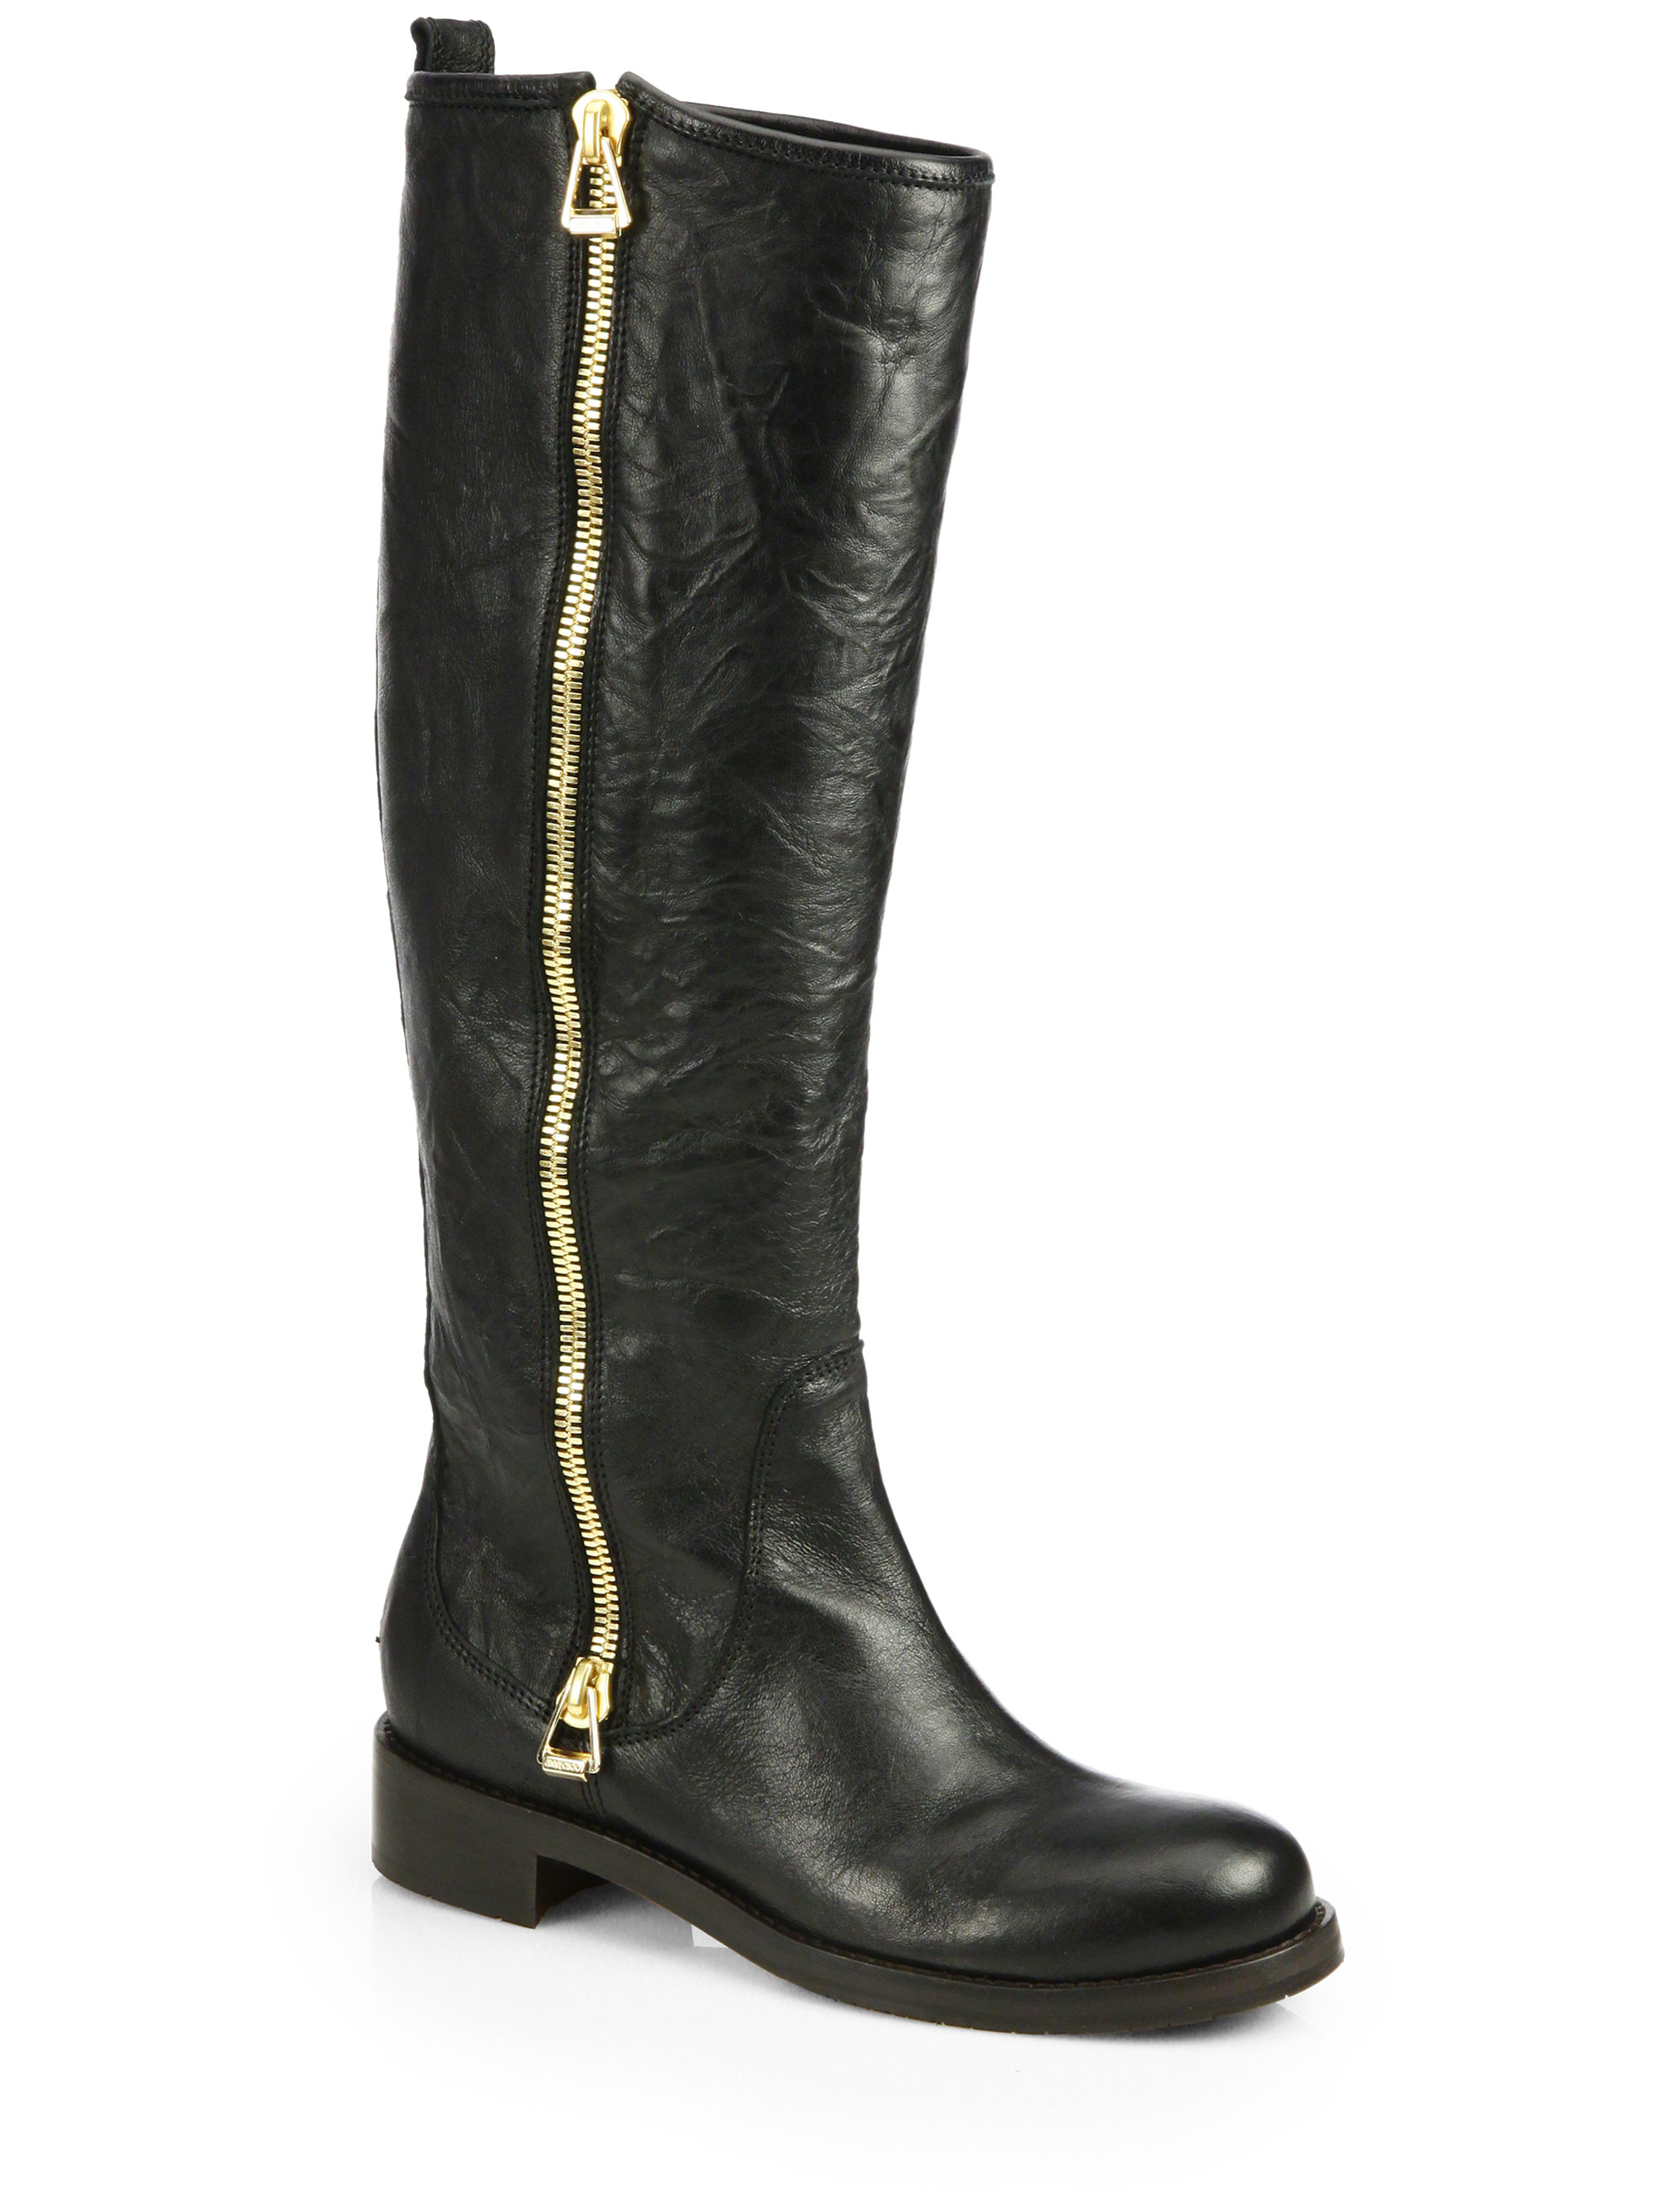 Jimmy choo Doreen Crinkled Leather Knee-high Boots in Black | Lyst